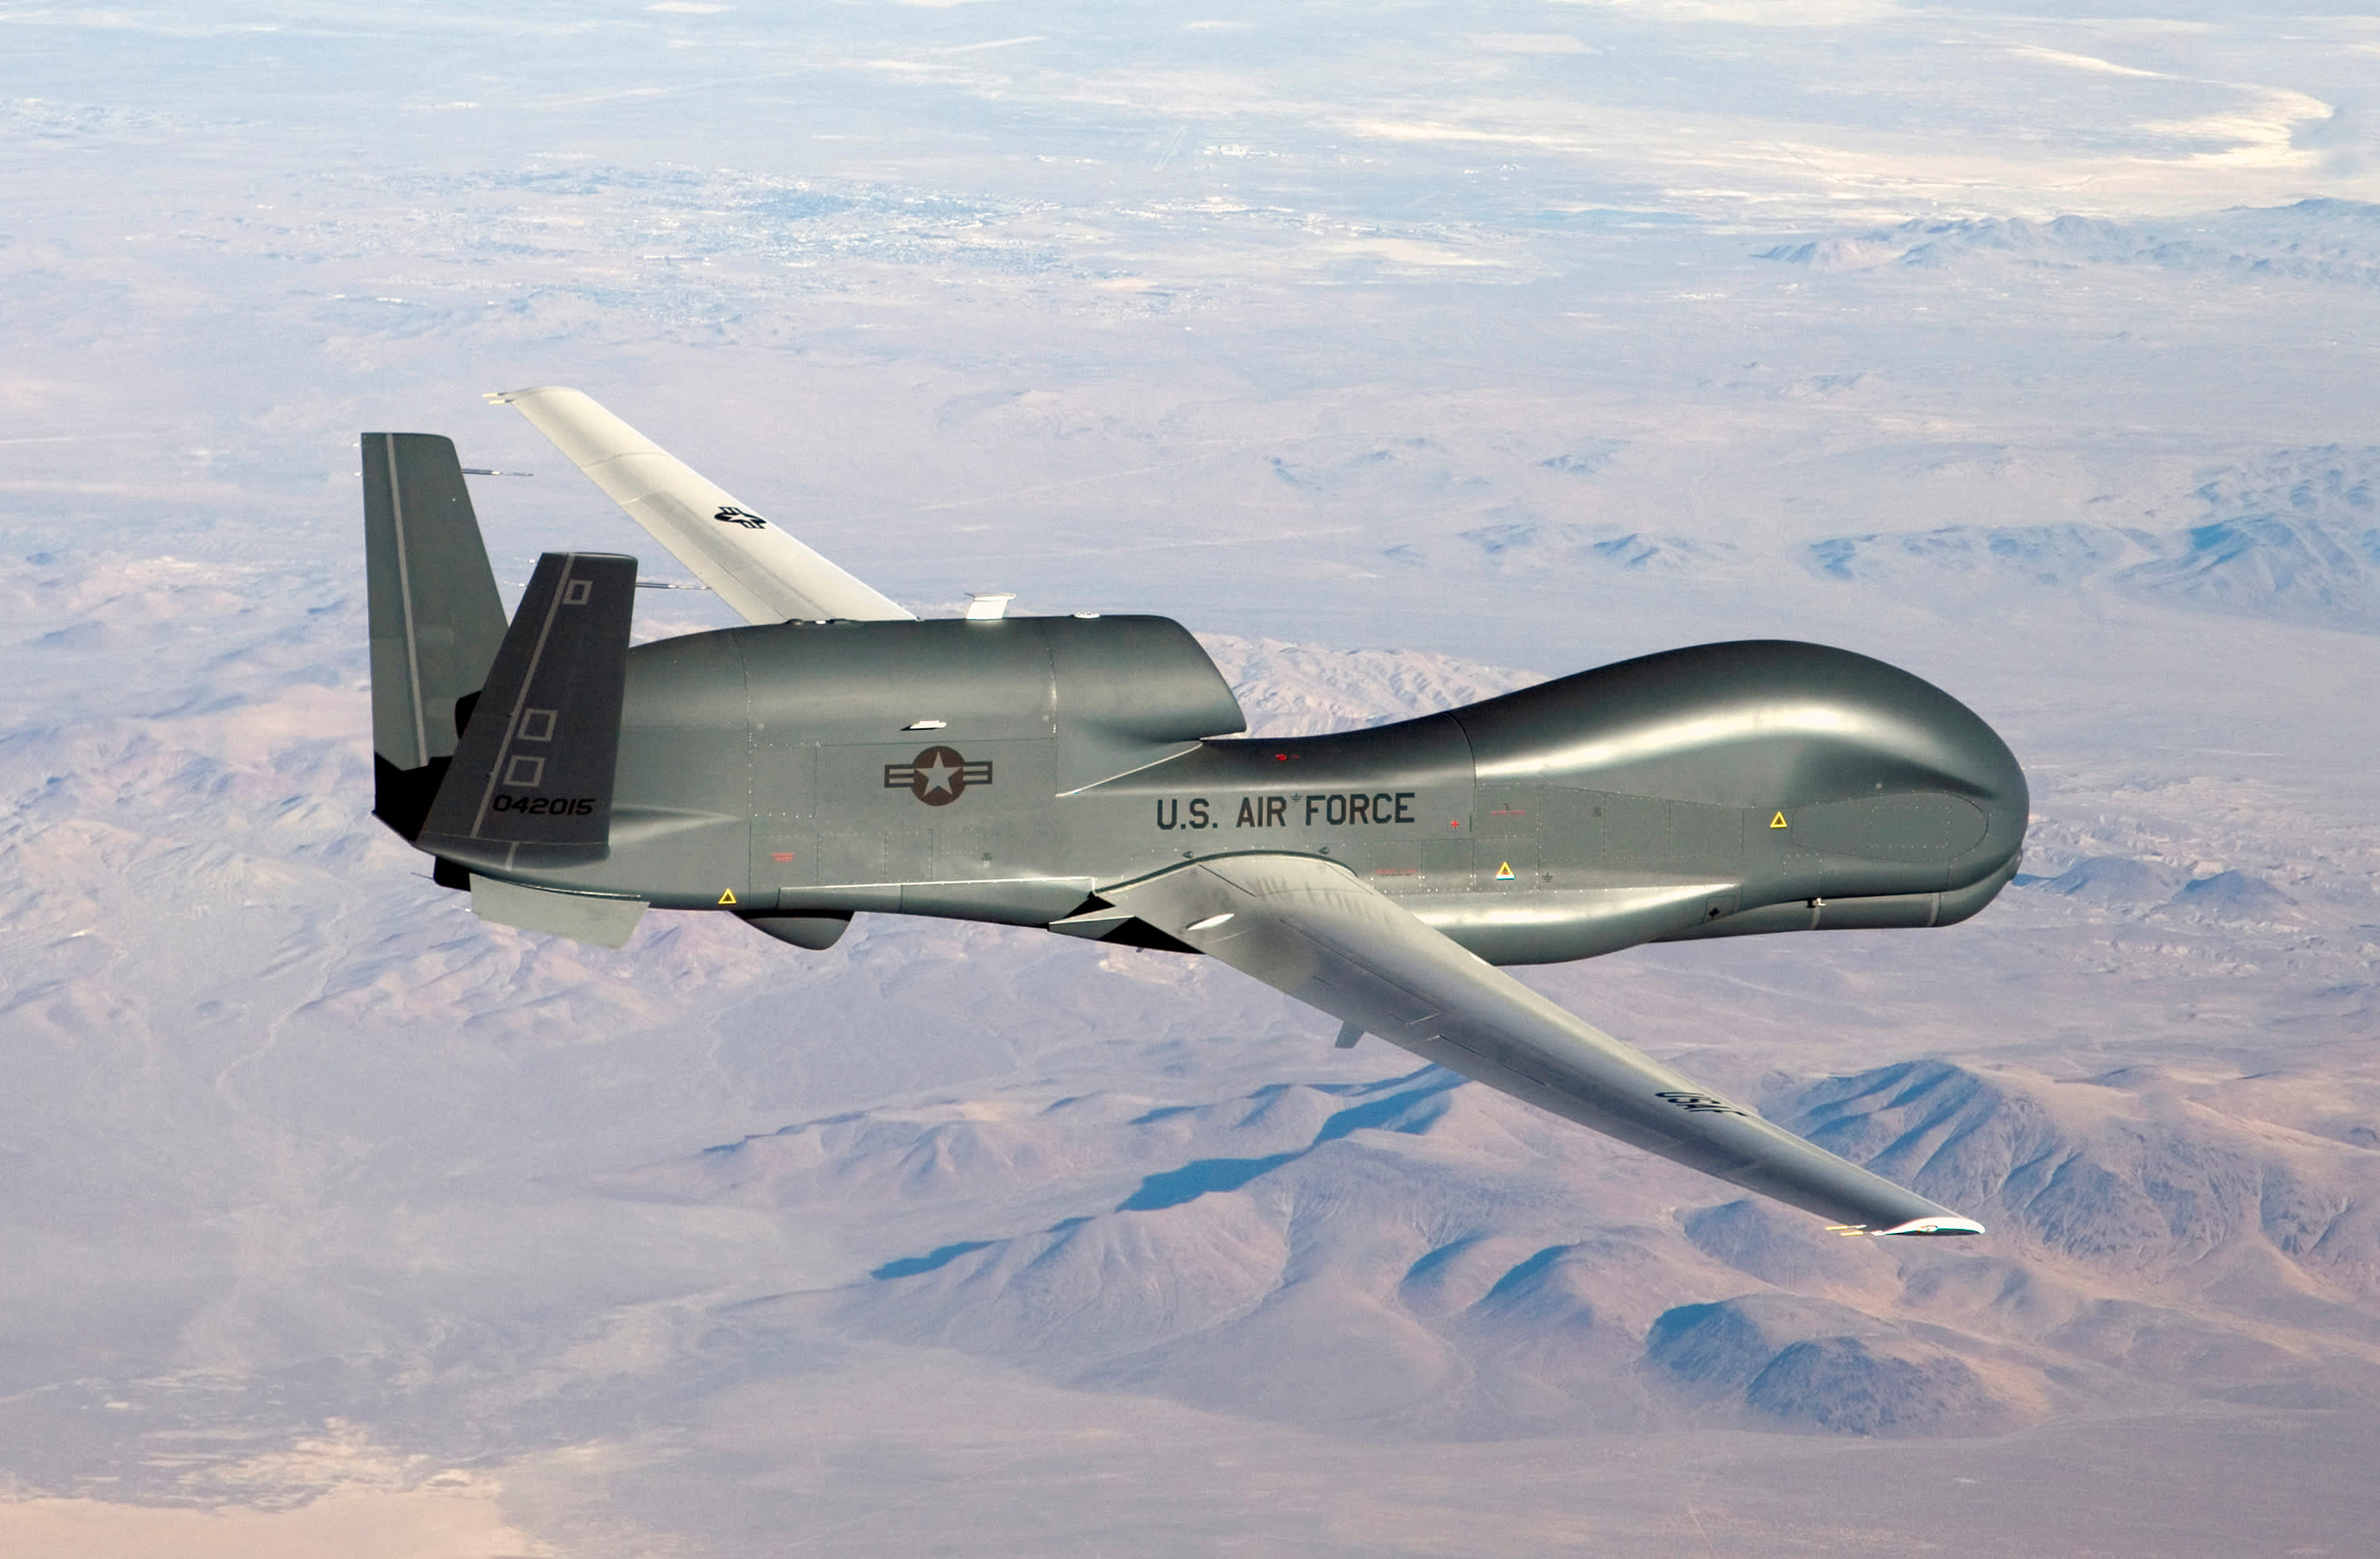 Whisper Won composite Iran shoots down US drone in international airspace, Pentagon says